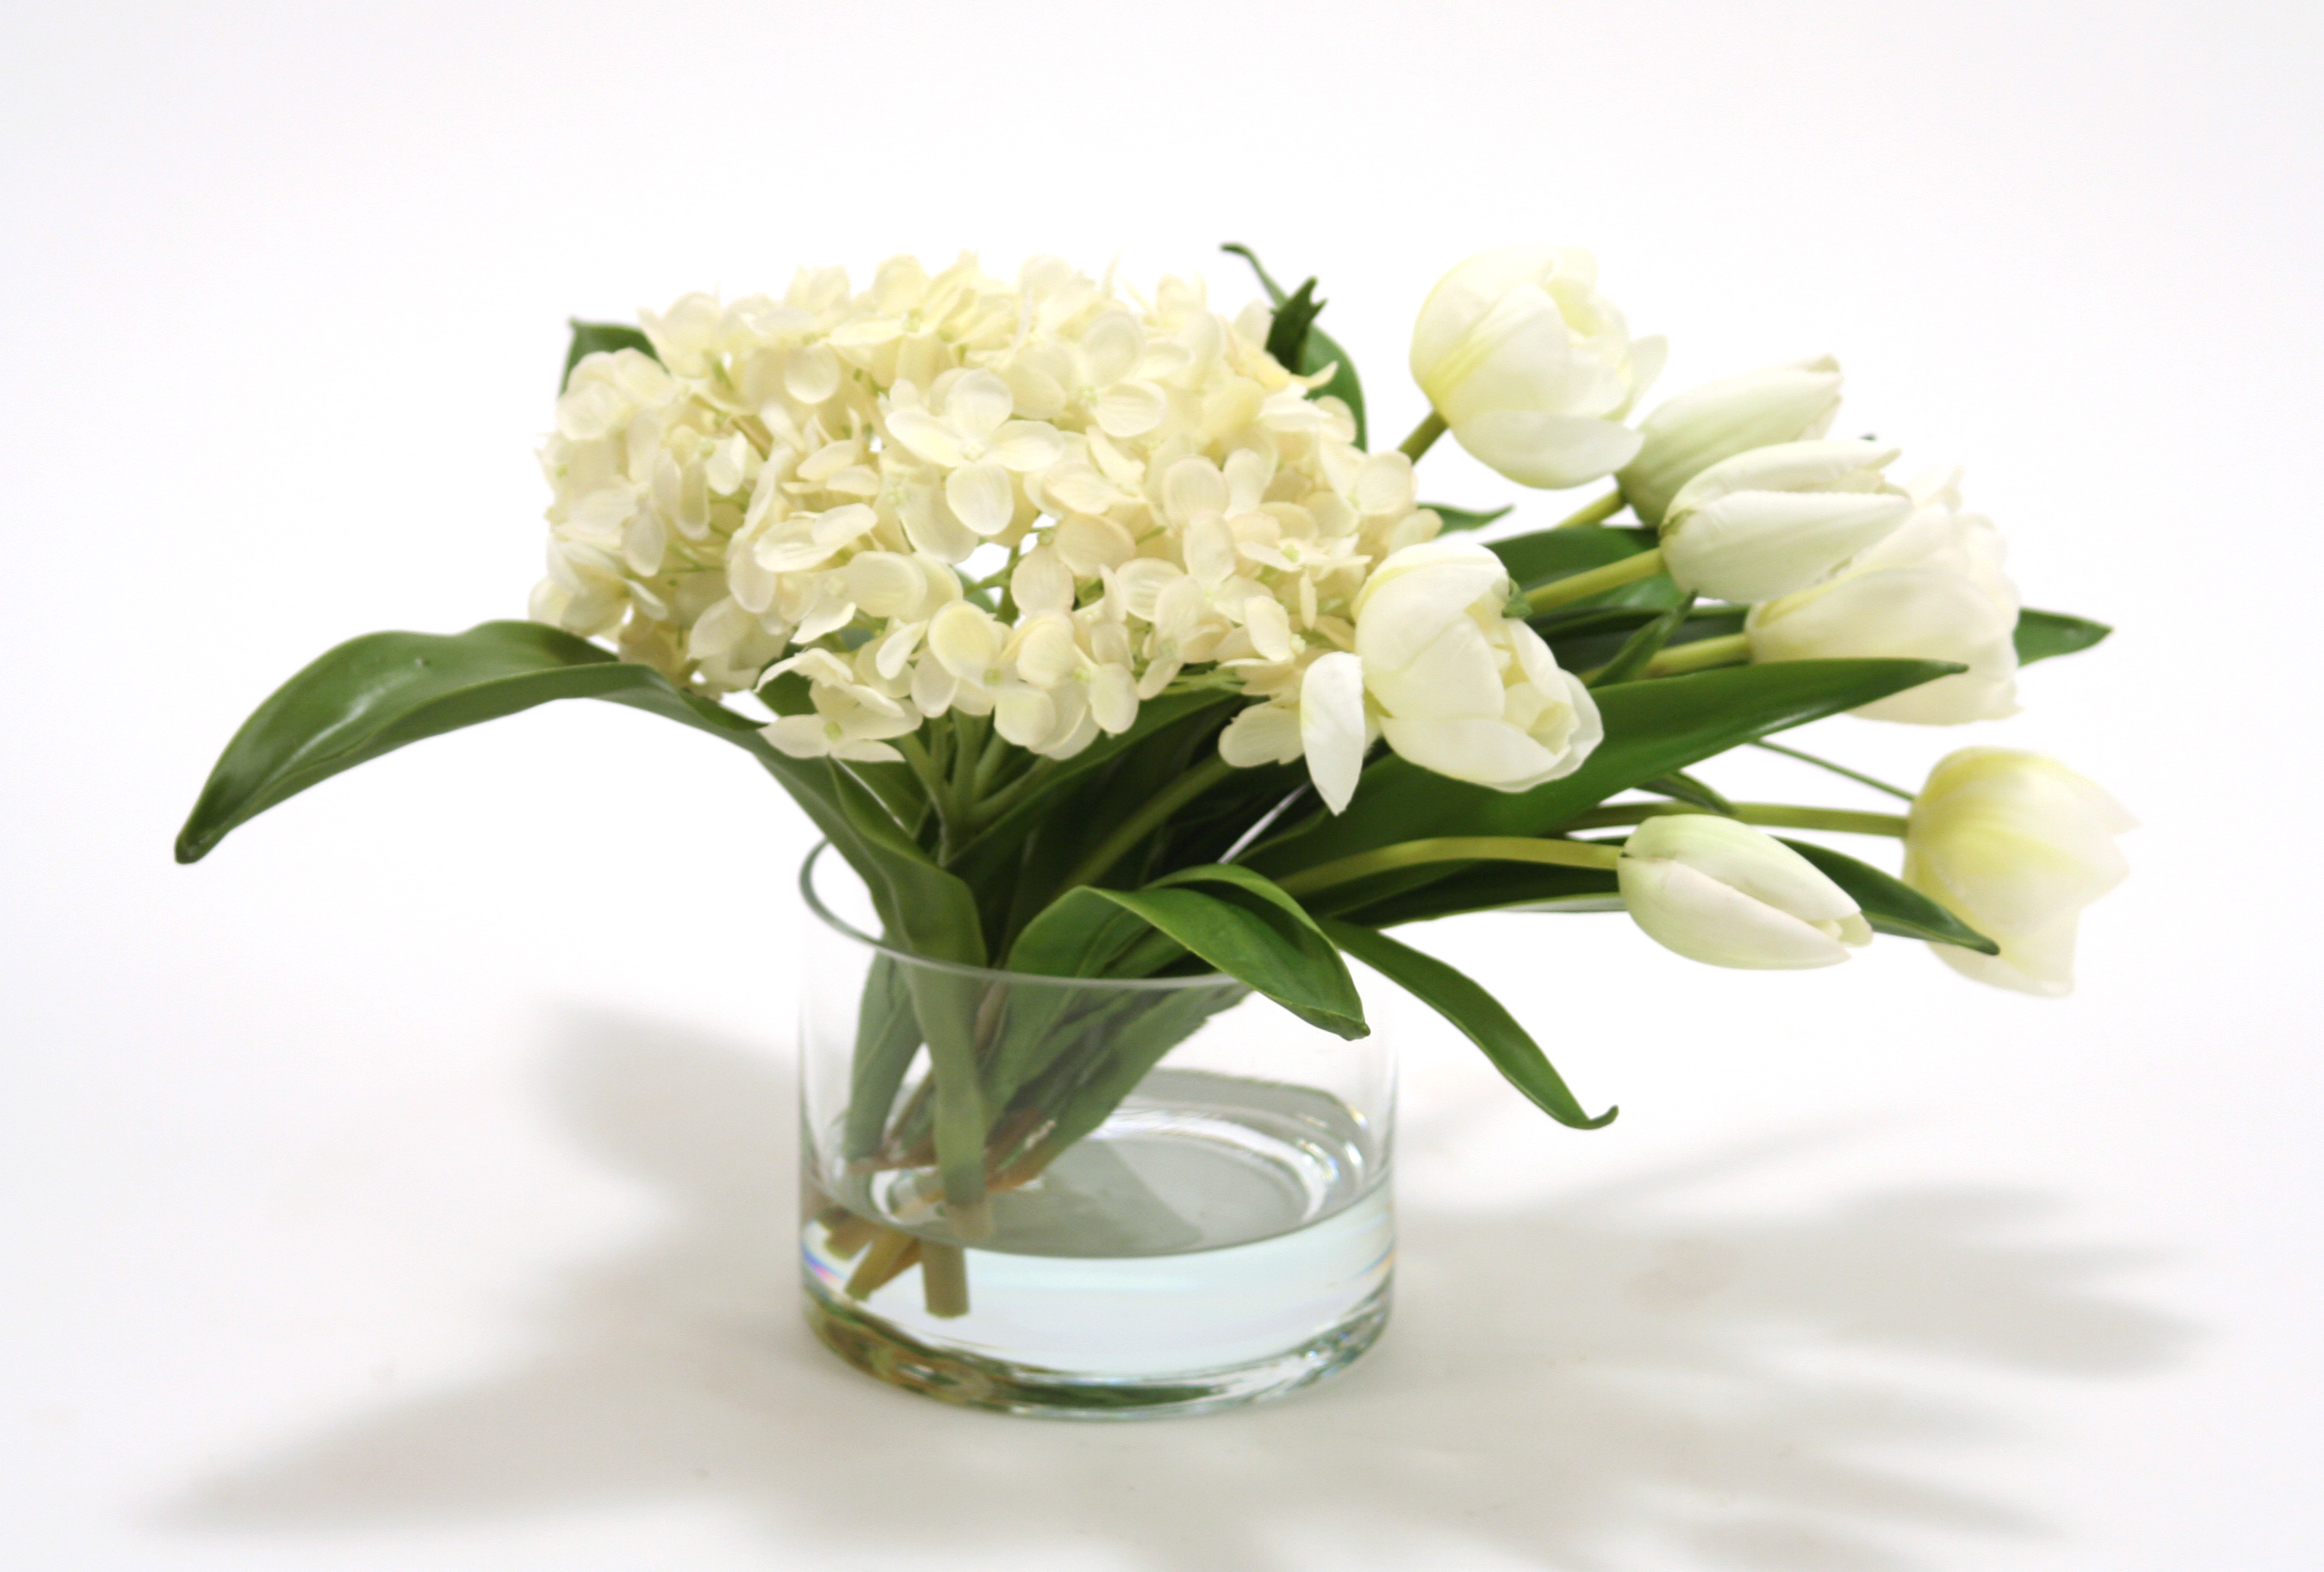 Waterlook ® Silk White Hydrangeas with White Stage Tulips in a Glass Cylinder